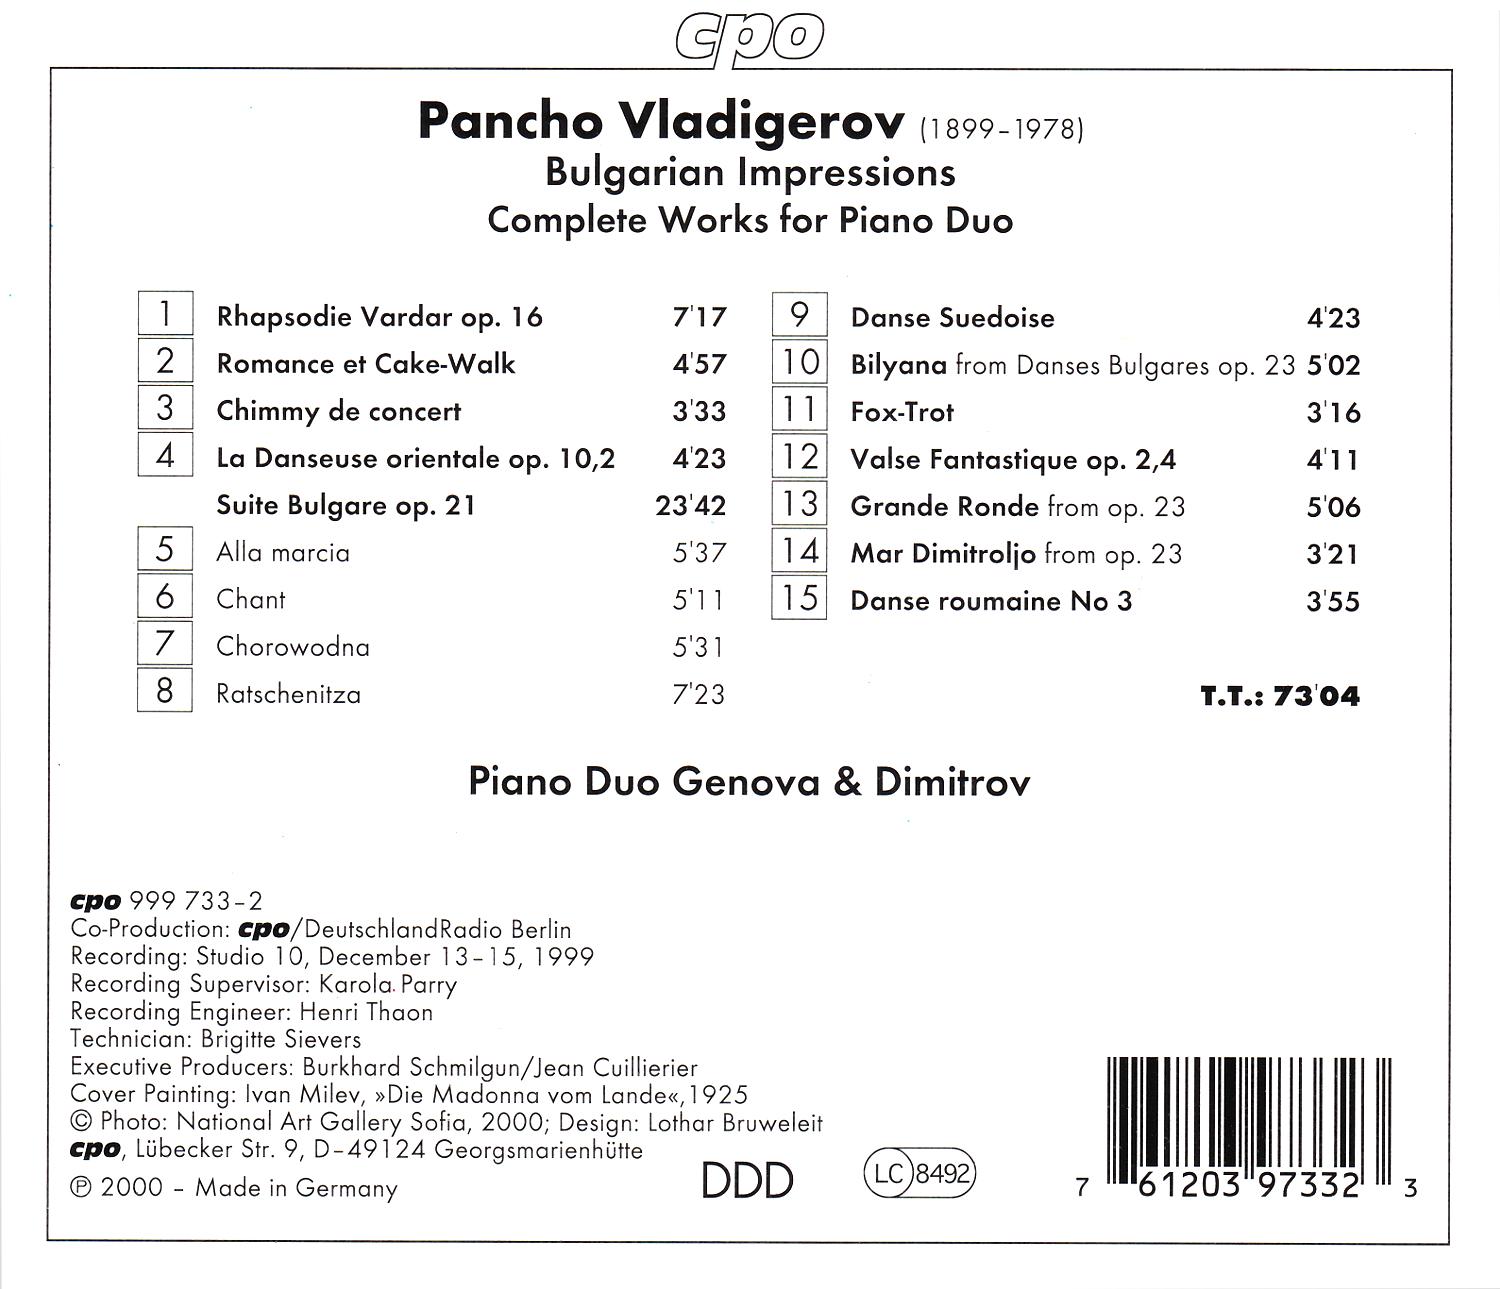 Bulgarian Impressions • Pancho Vladigerov • Complete Works for Piano Duo (cpo 999 733-2) | Back Inlay